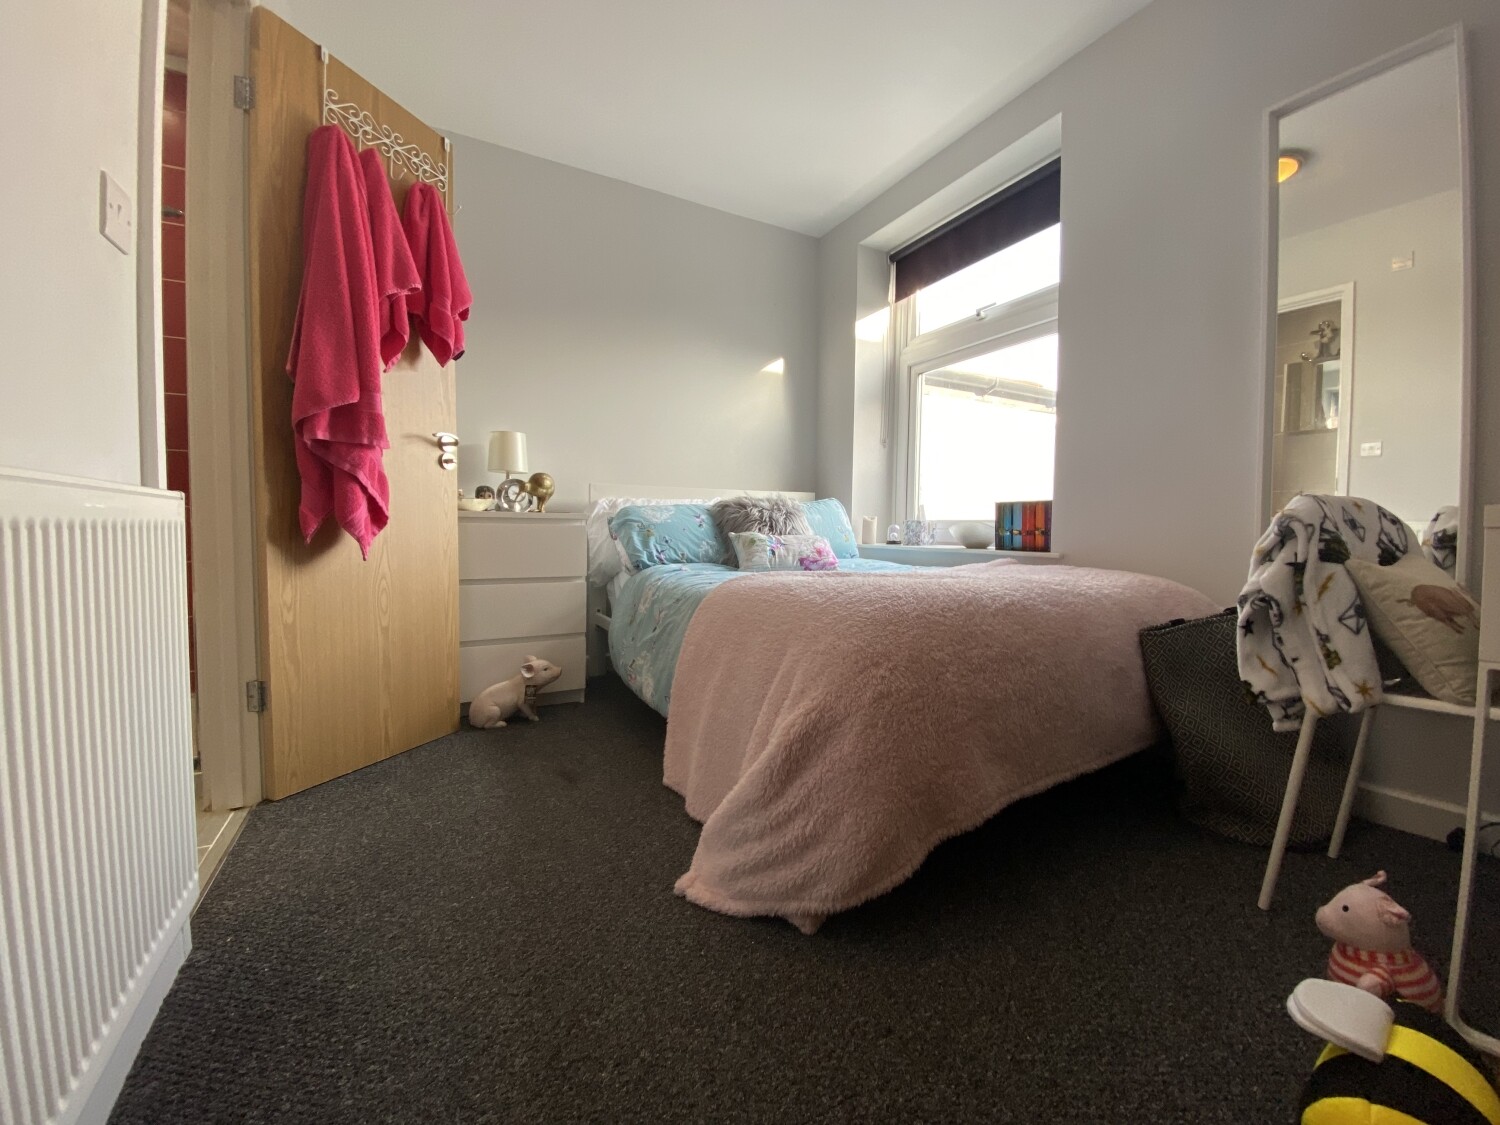 2 bedroom apartment for rent Cathays Terrace, Cardiff, CF24 4JA | UniHomes